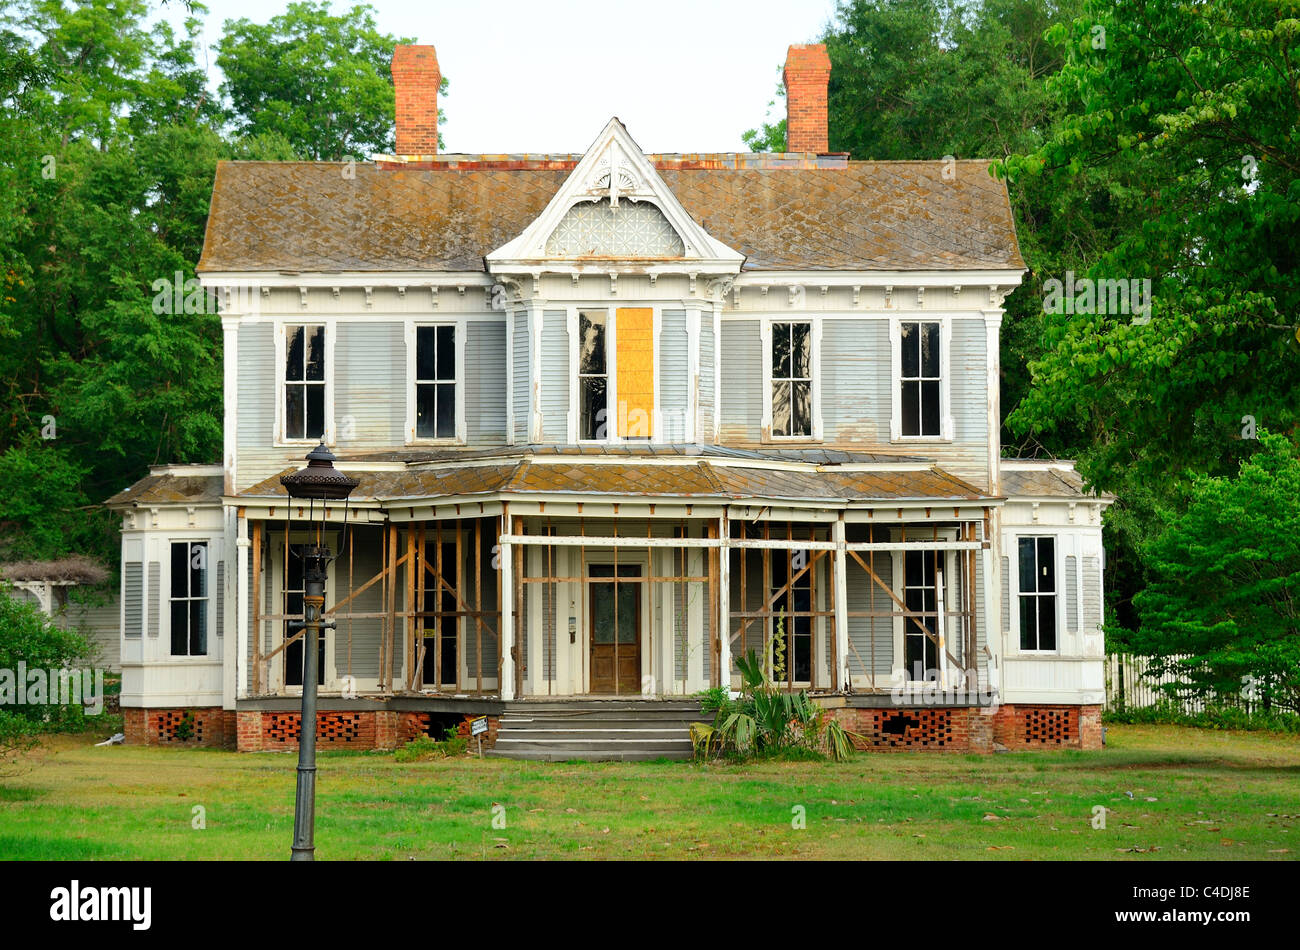 An old abandoned antebellum home. Stock Photo